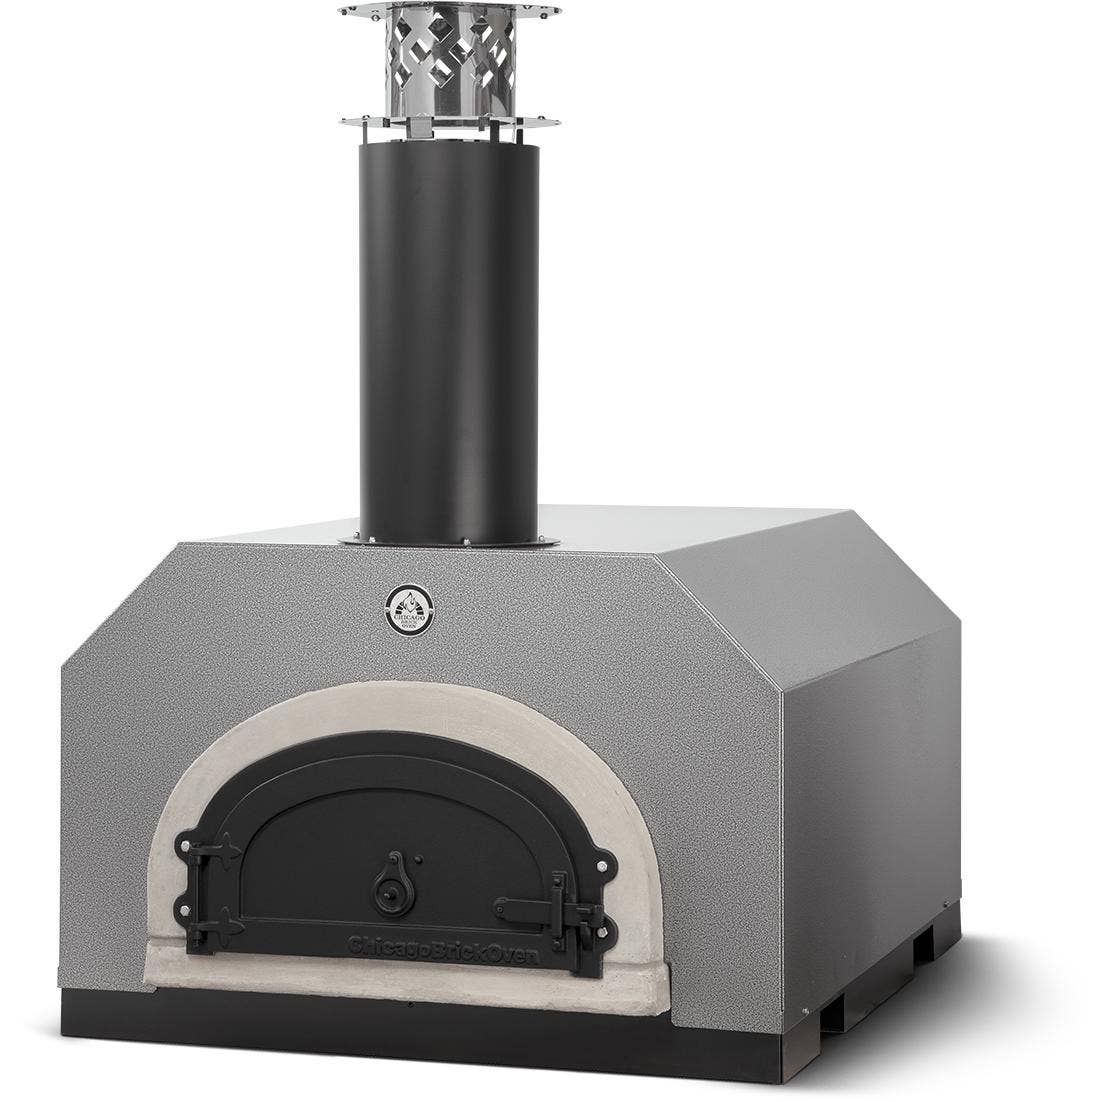 Chicago Brick Oven CBO-750 Countertop Wood Fired Pizza Oven Pizza Makers & Ovens Silver Vein 12026328